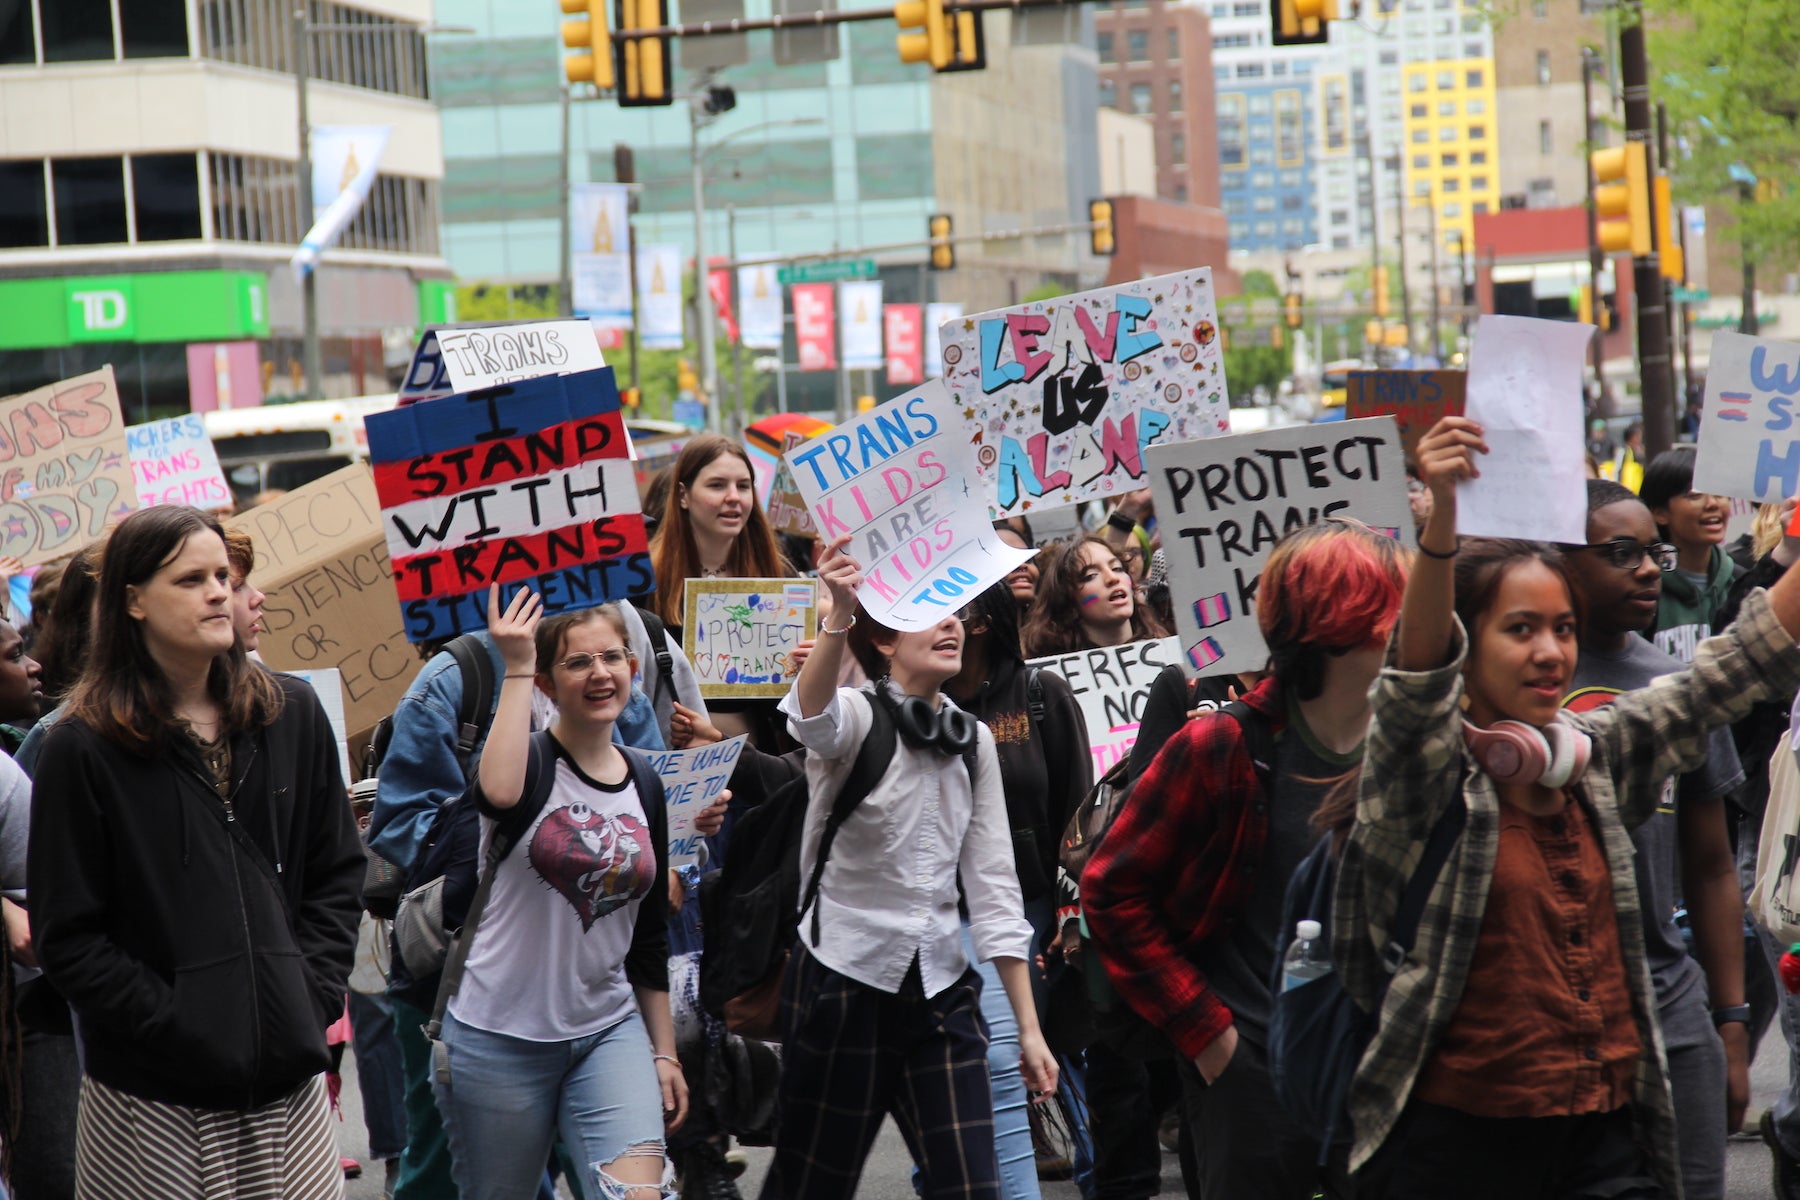 Rally to Protect Trans Youth